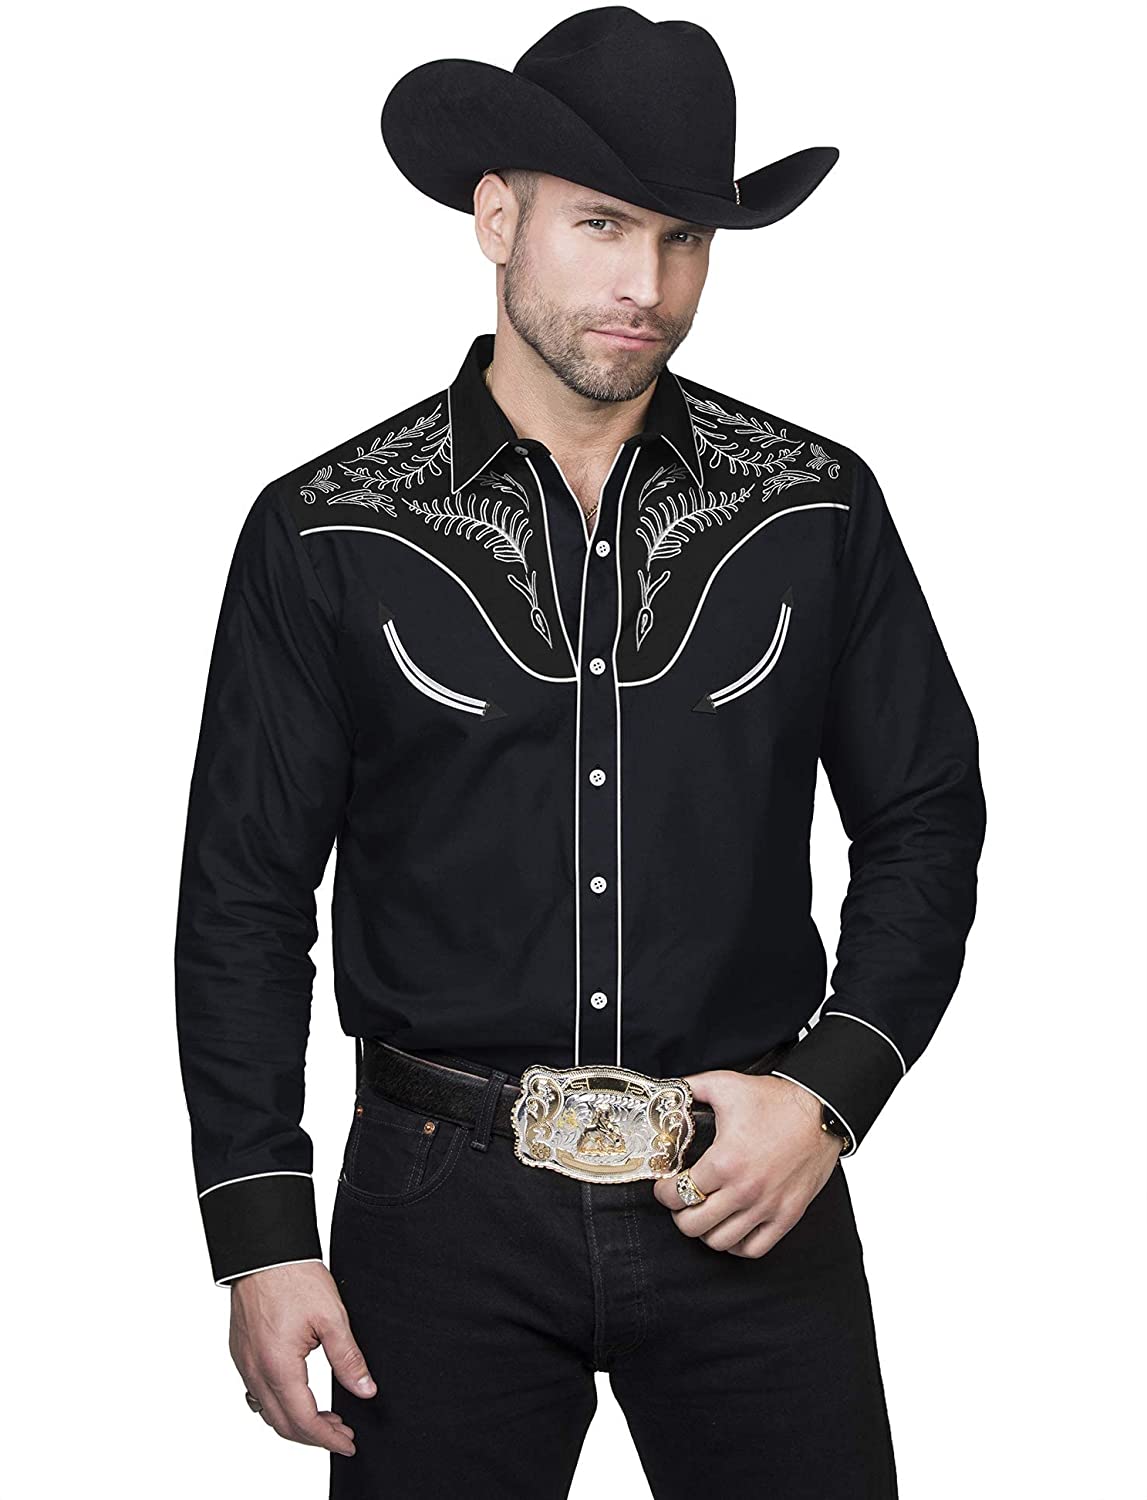 COOFANDY Men's Western Cowboy Shirt Embroidered Long Sleeve Slim Fit Casual  Cotton Button Down Hippie Shirts with Pockets